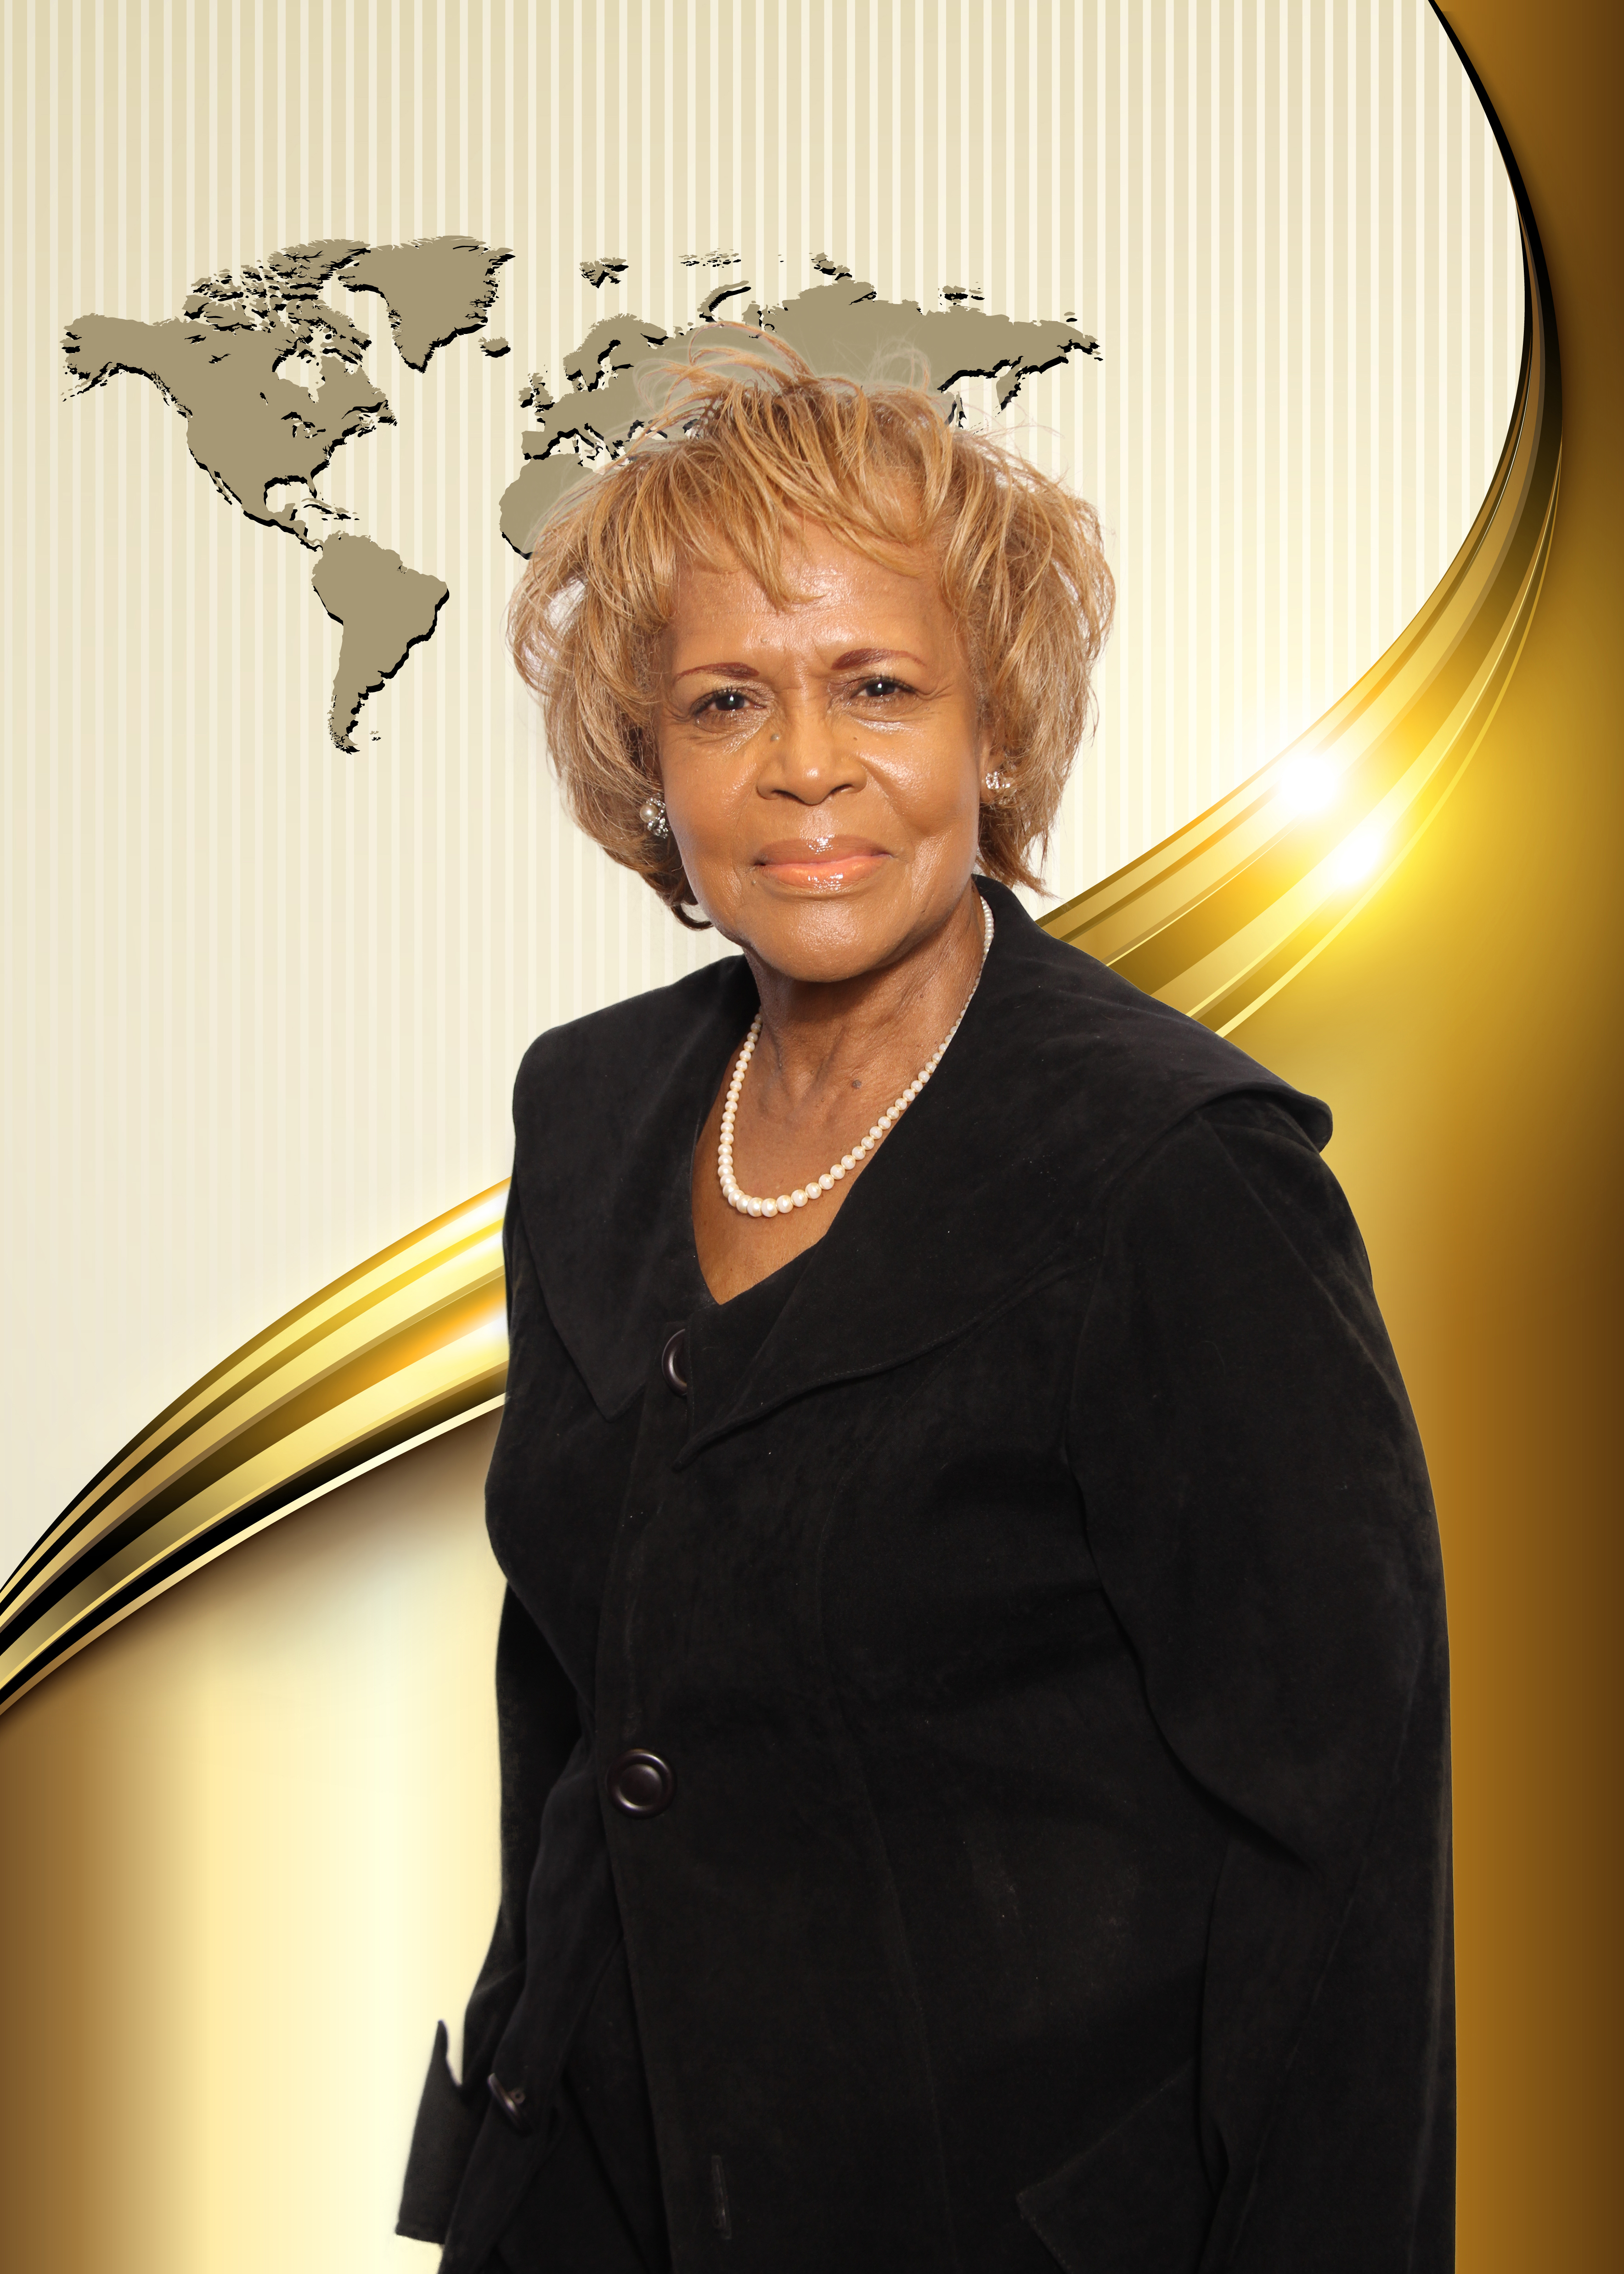 INTERVIEW DR. MAMIE SMITH